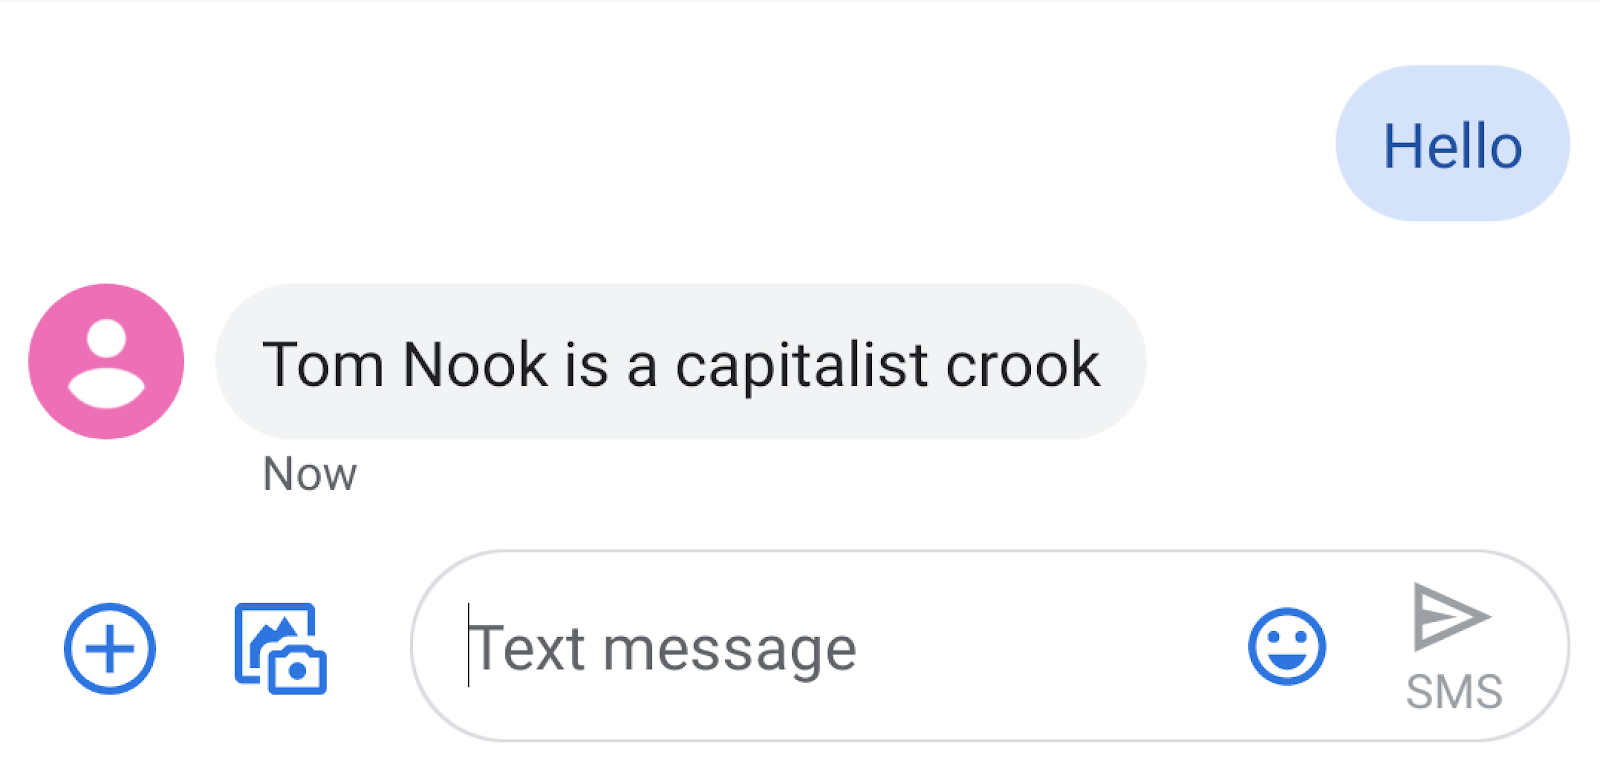 Tom Nook is a capitalist crook